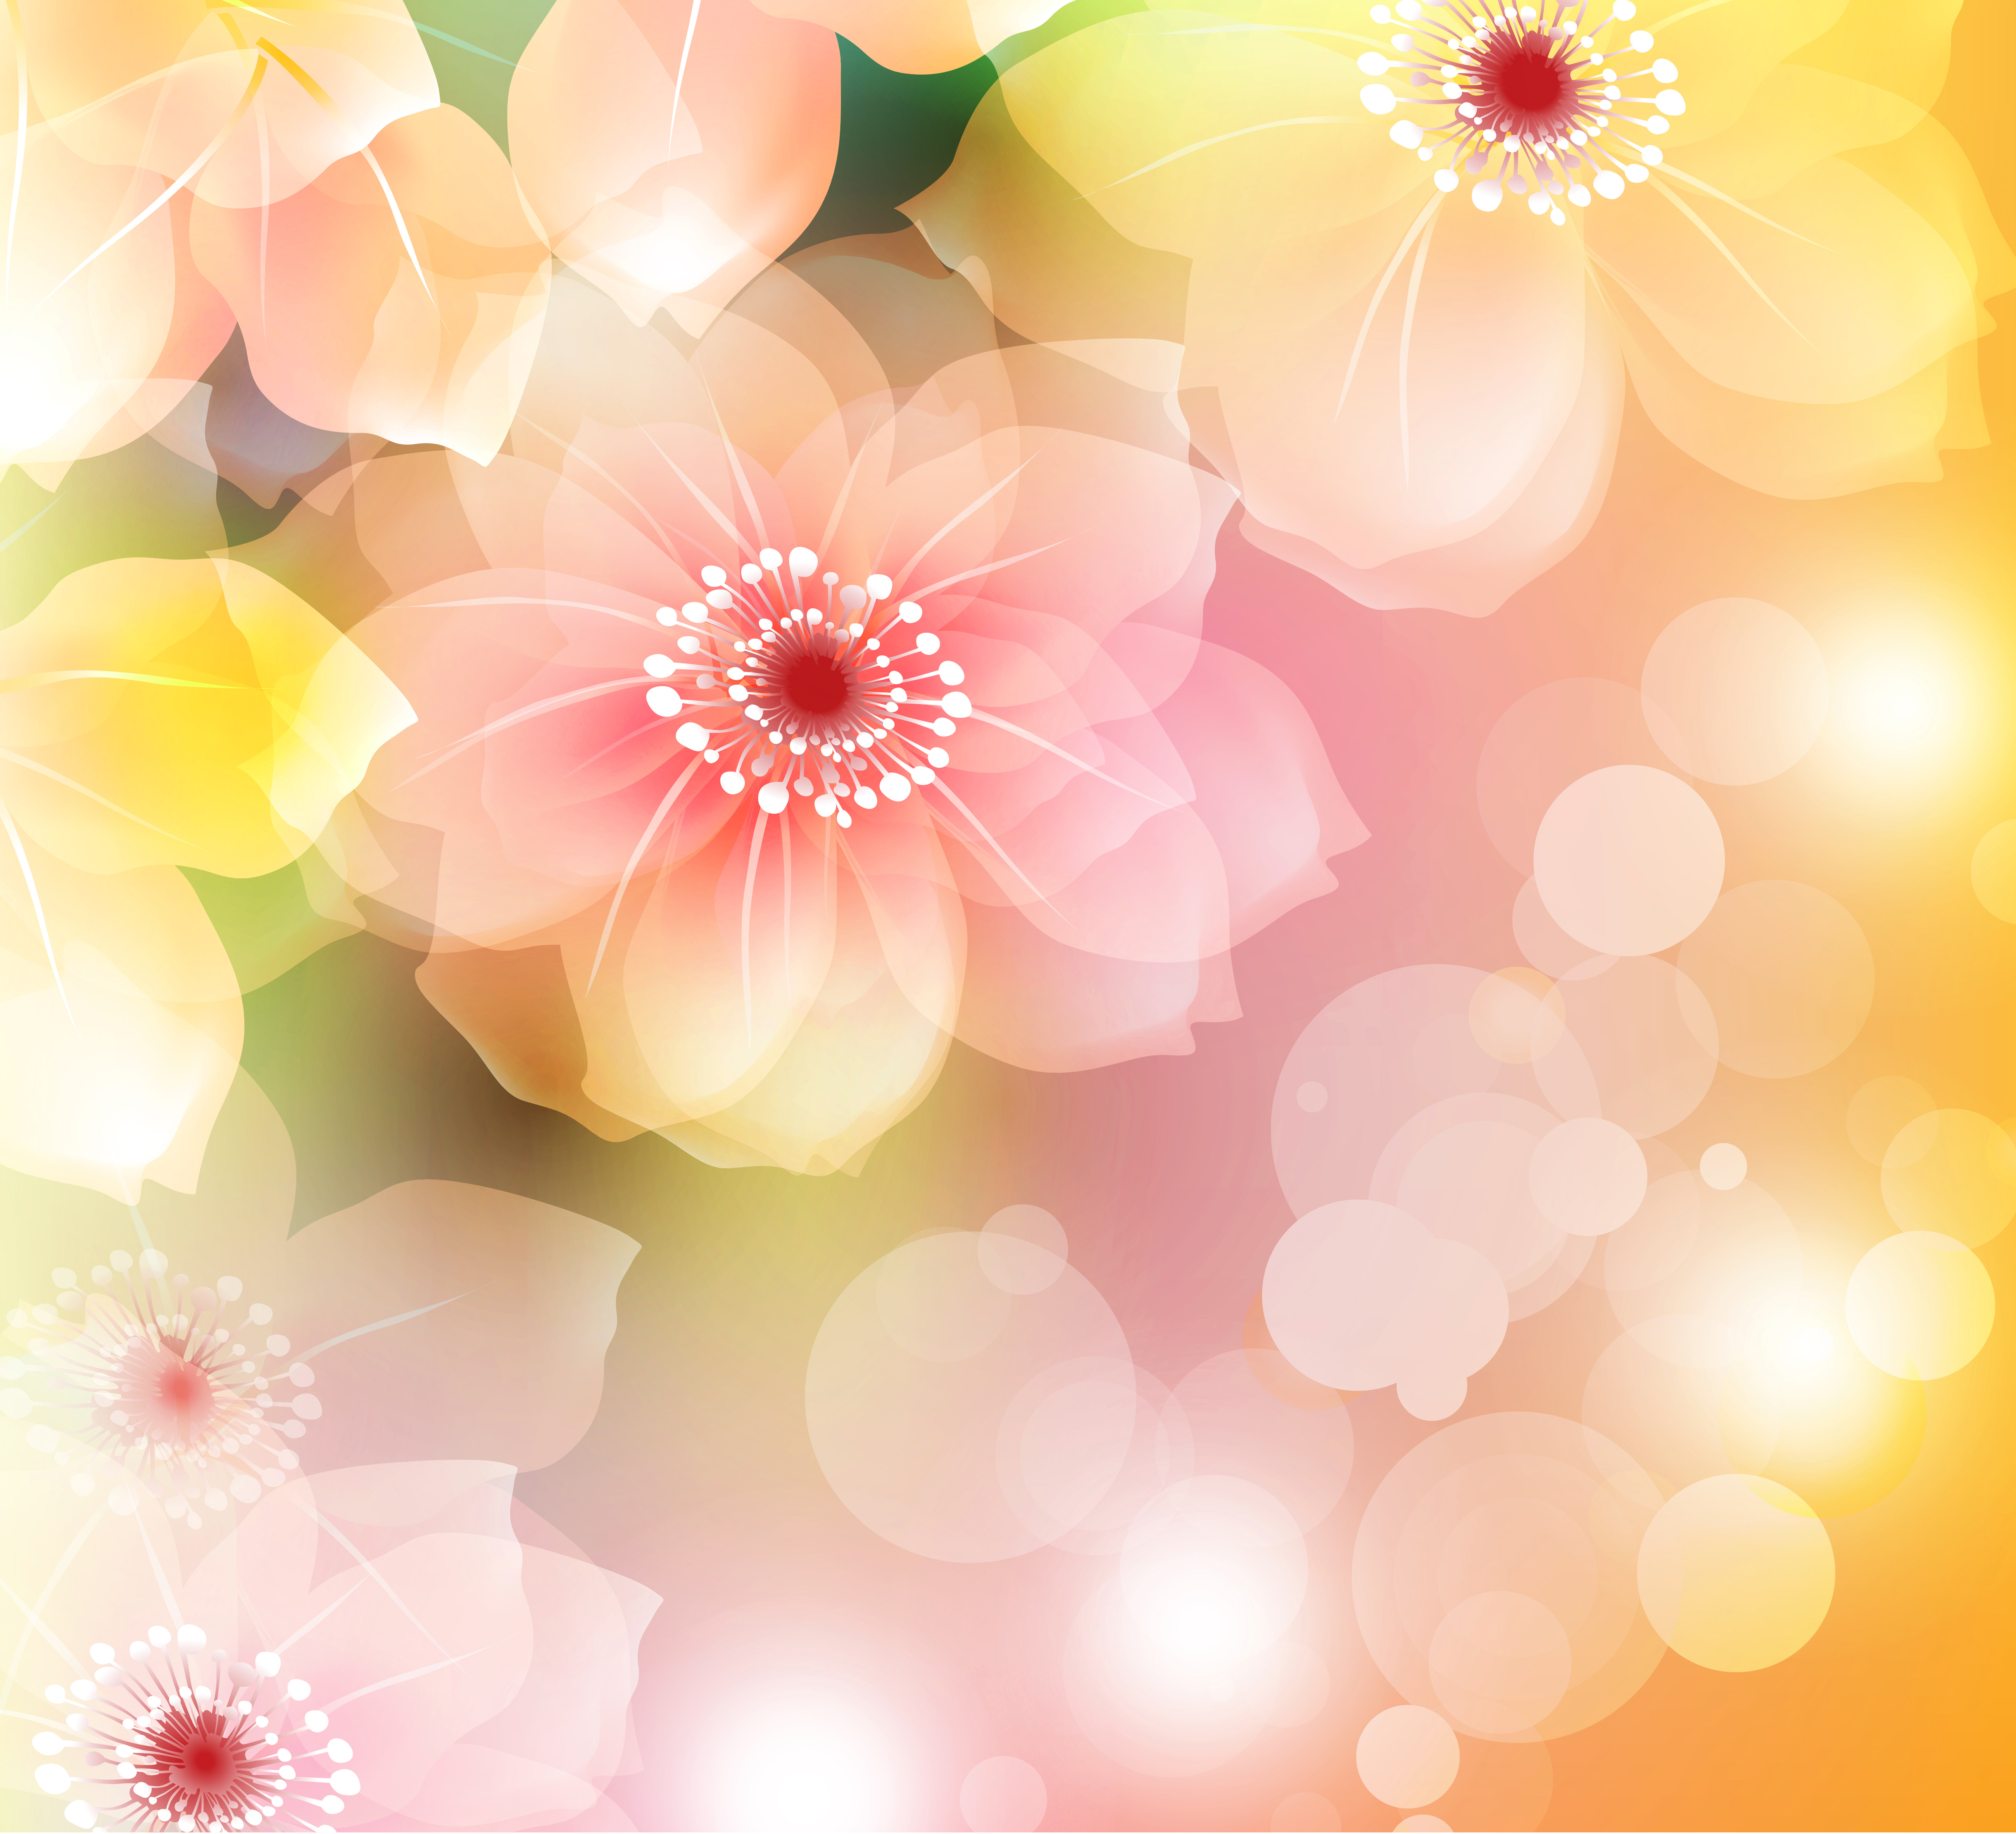 Floral Background Gallery Yopriceville High Quality Image